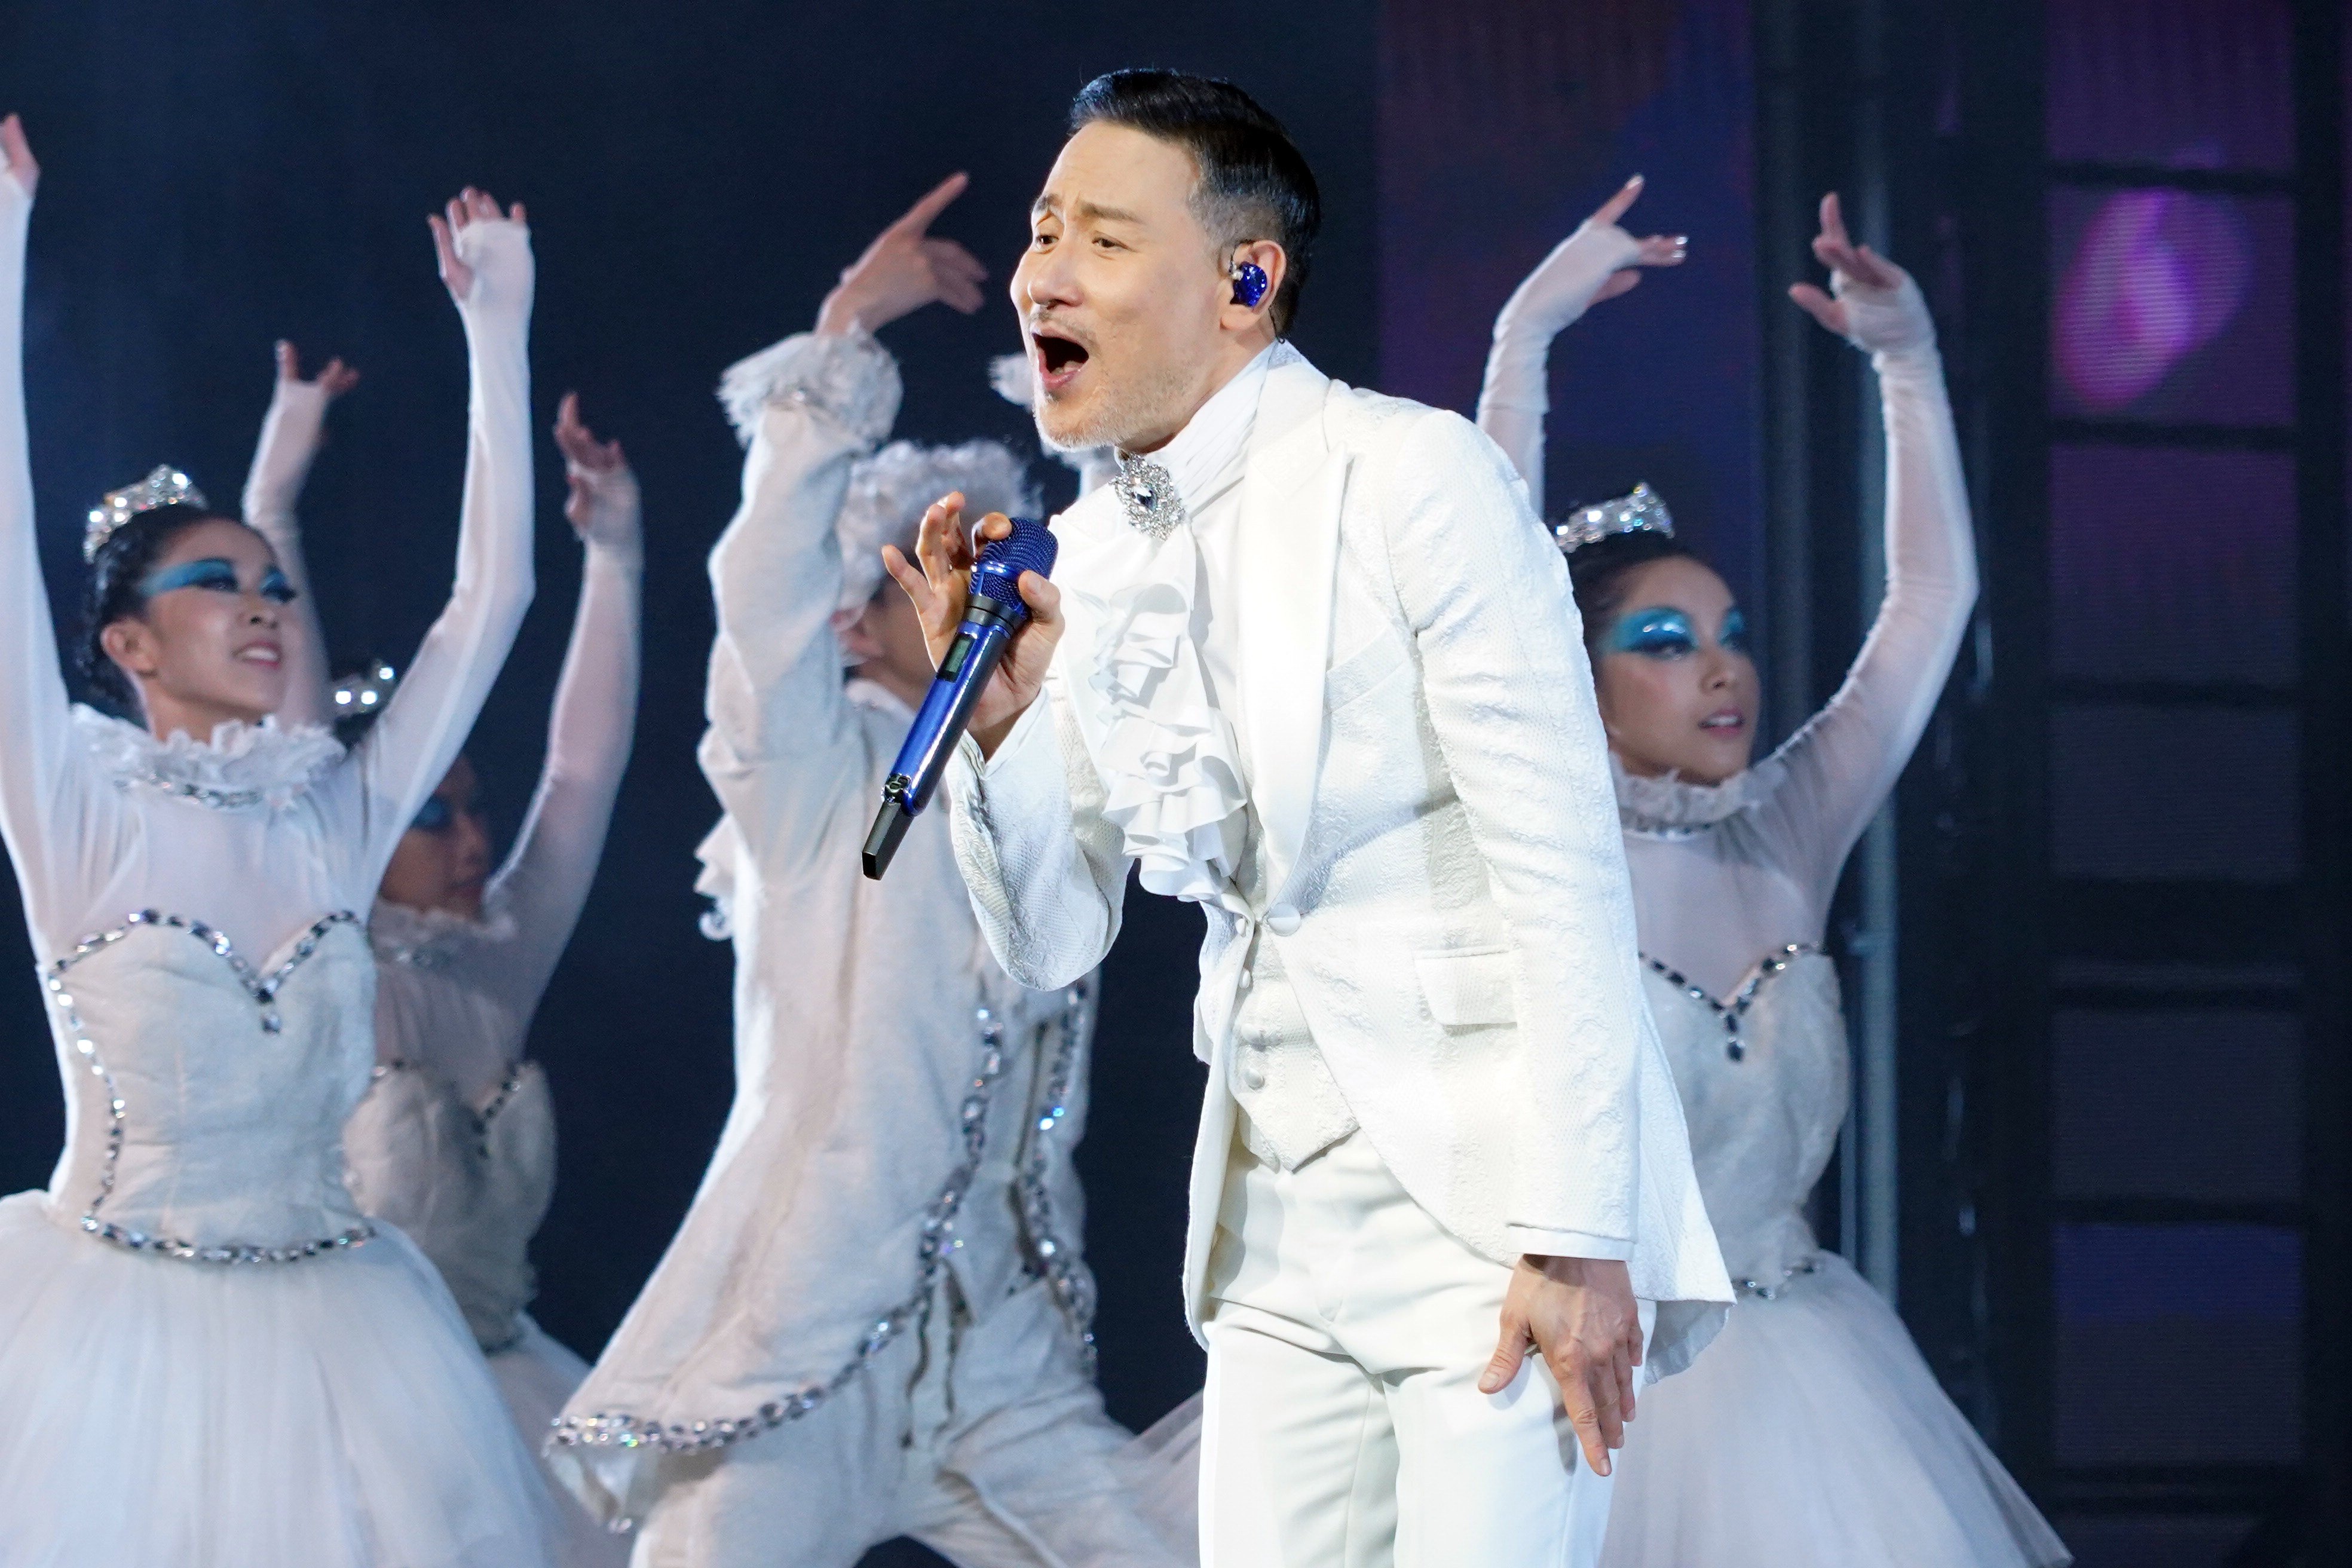 Singer Jacky Cheung Hok-yau performs during a concert on the Hong Kong leg of his Jacky Cheung 60+ Concert Tour in January 2024. The singer cancelled tour dates in Hangzhou, China, this weekend, the third such cancellation since March because of health issues. Photo: Getty Images